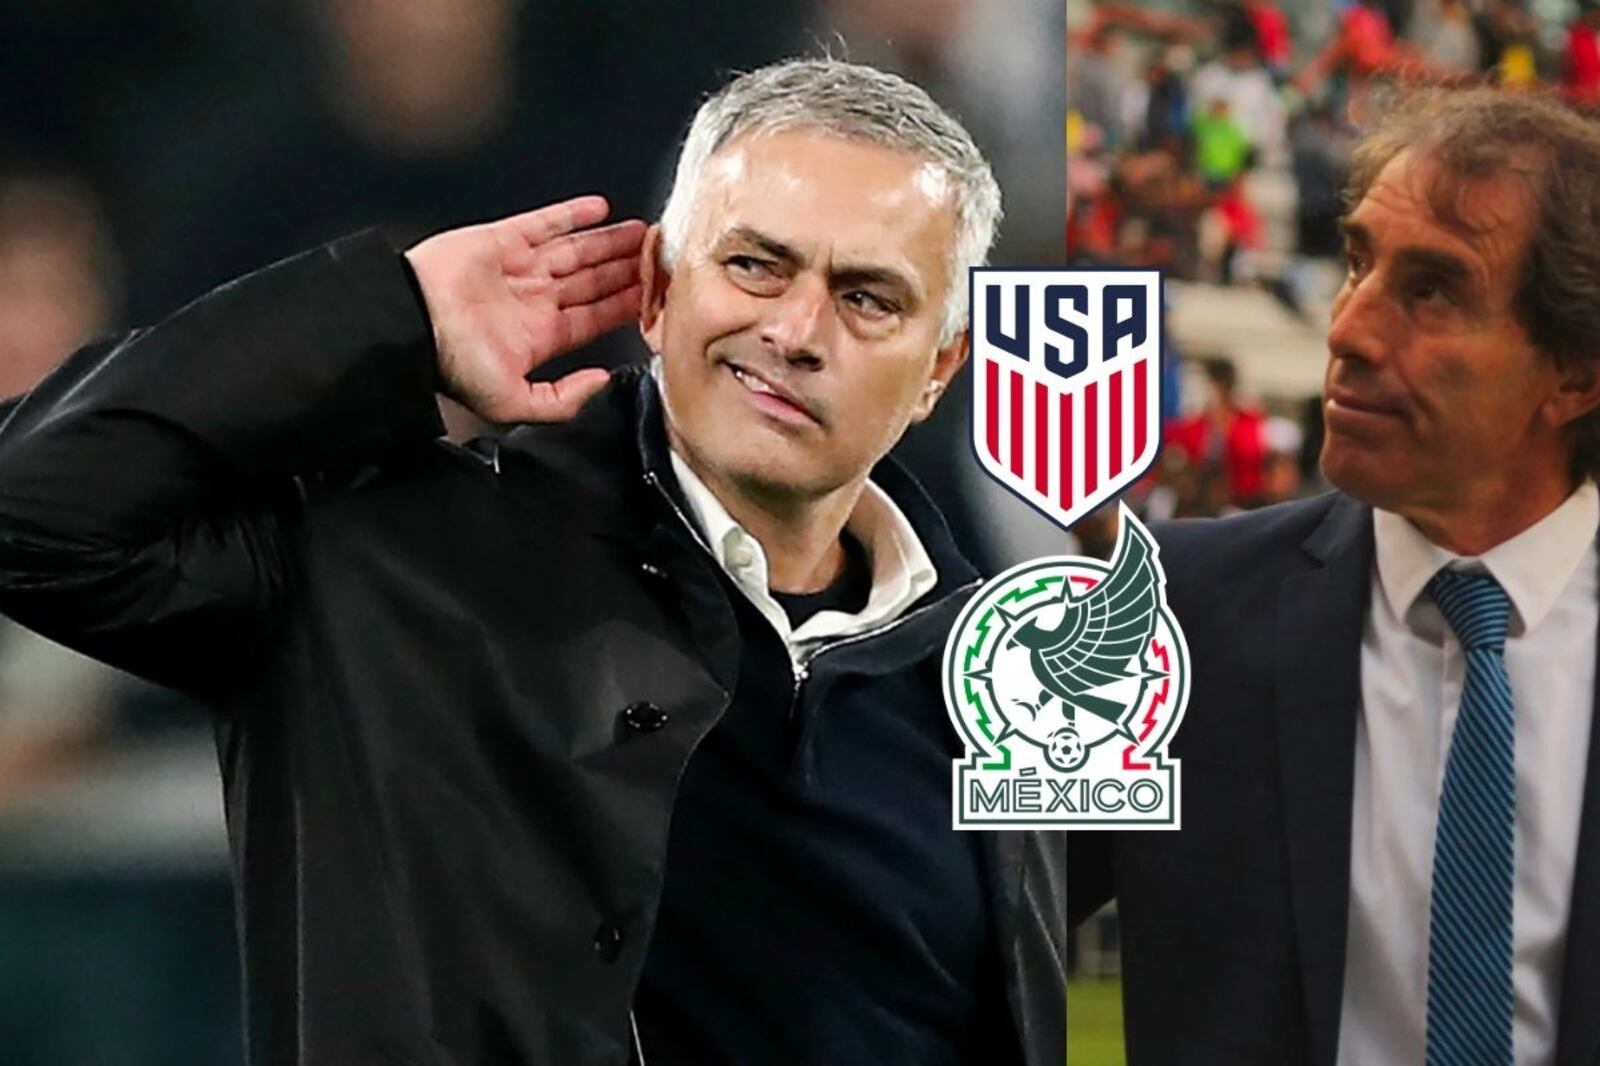 While Mourinho would ask for $7 million from USMNT, the salary El Tri should pay Guillermo Almada